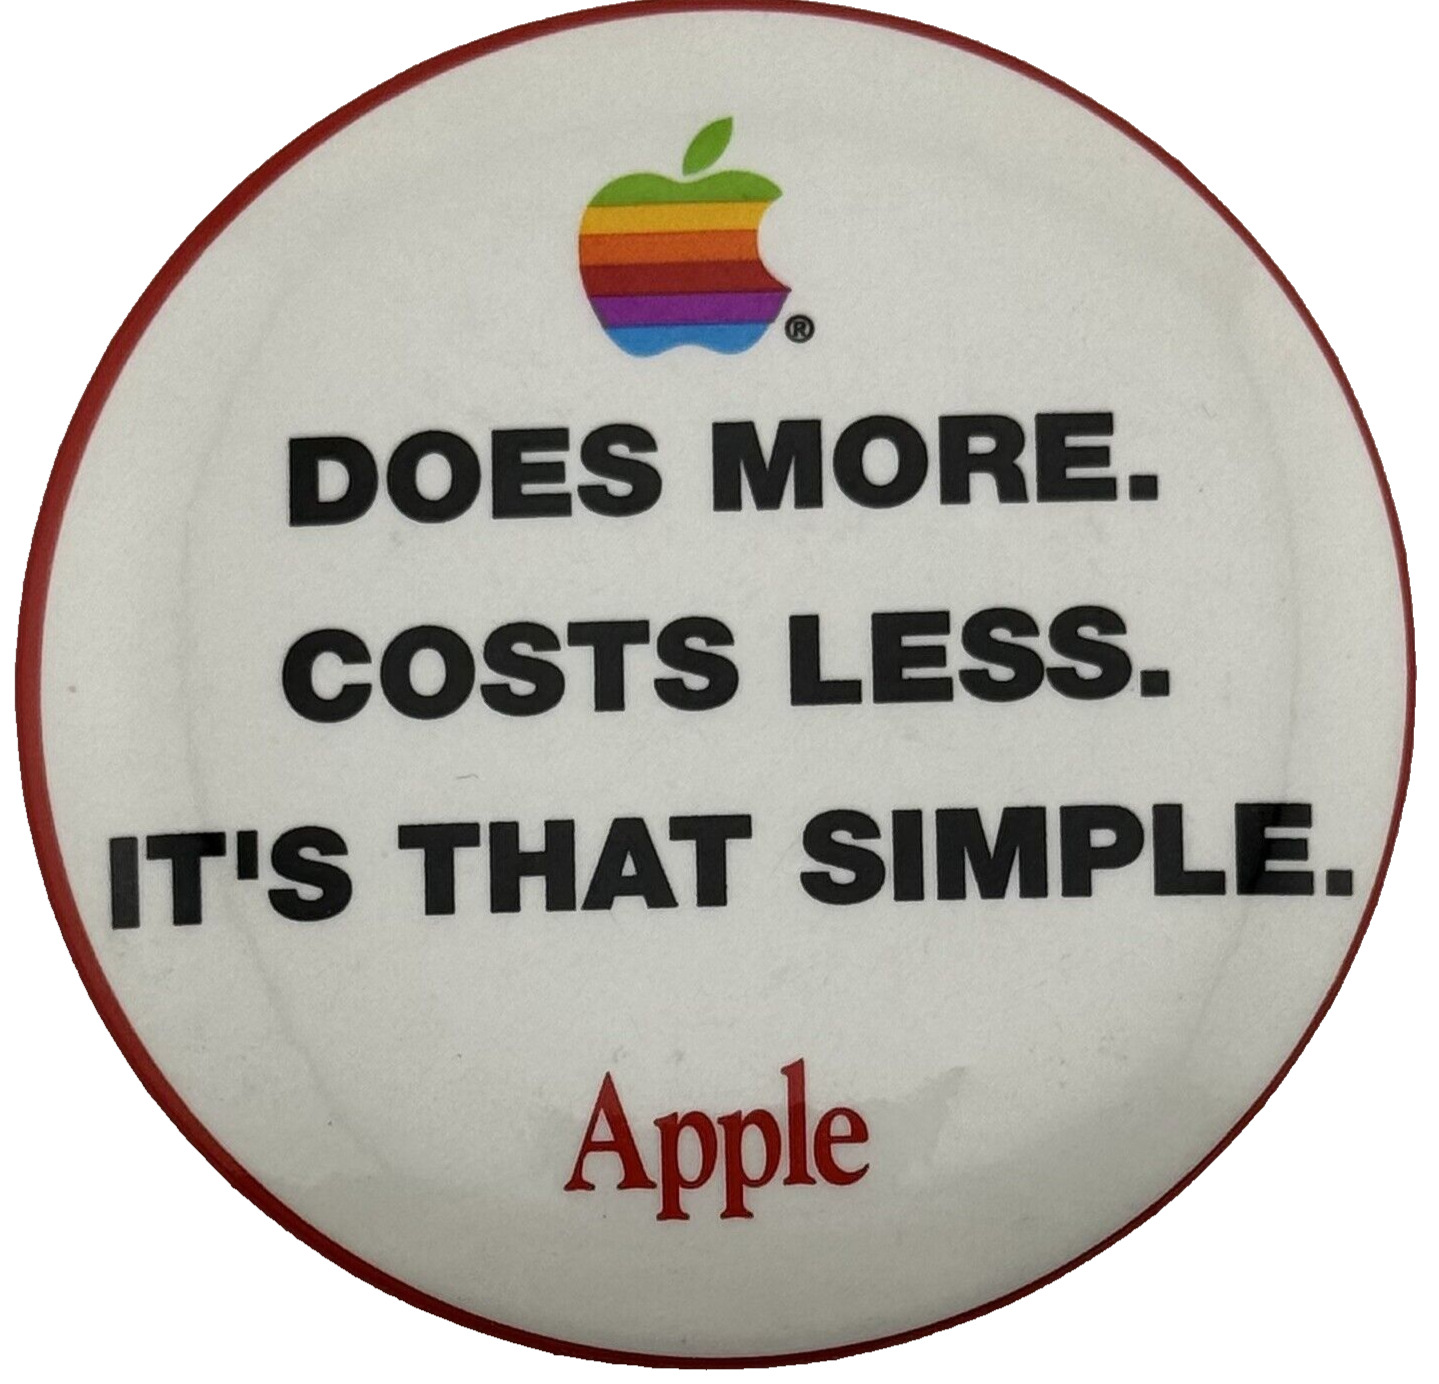 1980s APPLE COMPUTER DOES MORE COSTS LESS Badge Button 80s Pin Pinback Vintage